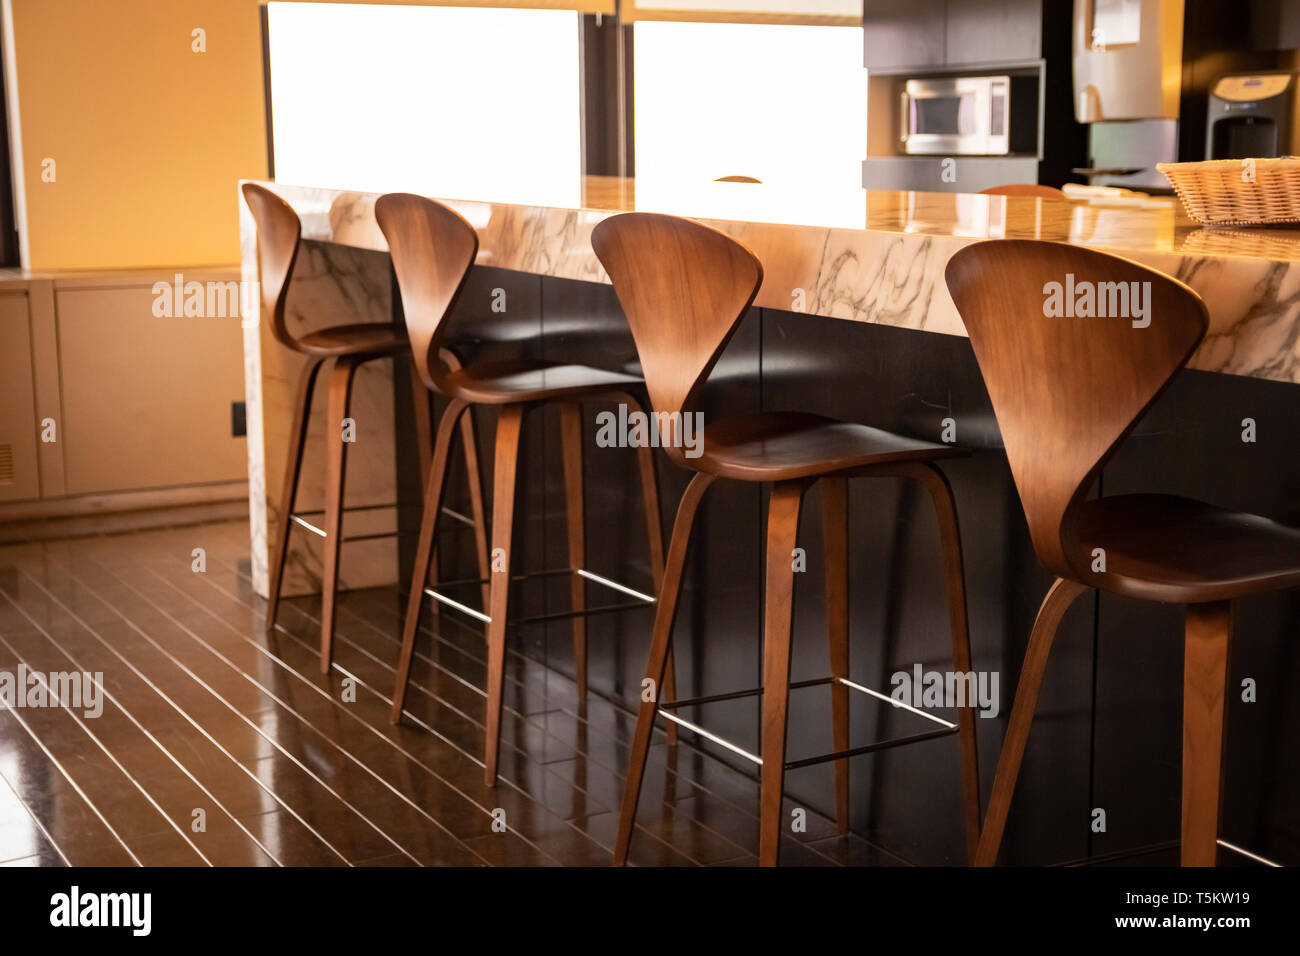 Fine wood chairs lined up at a spacious kitchen breakfast bar Stock Photo